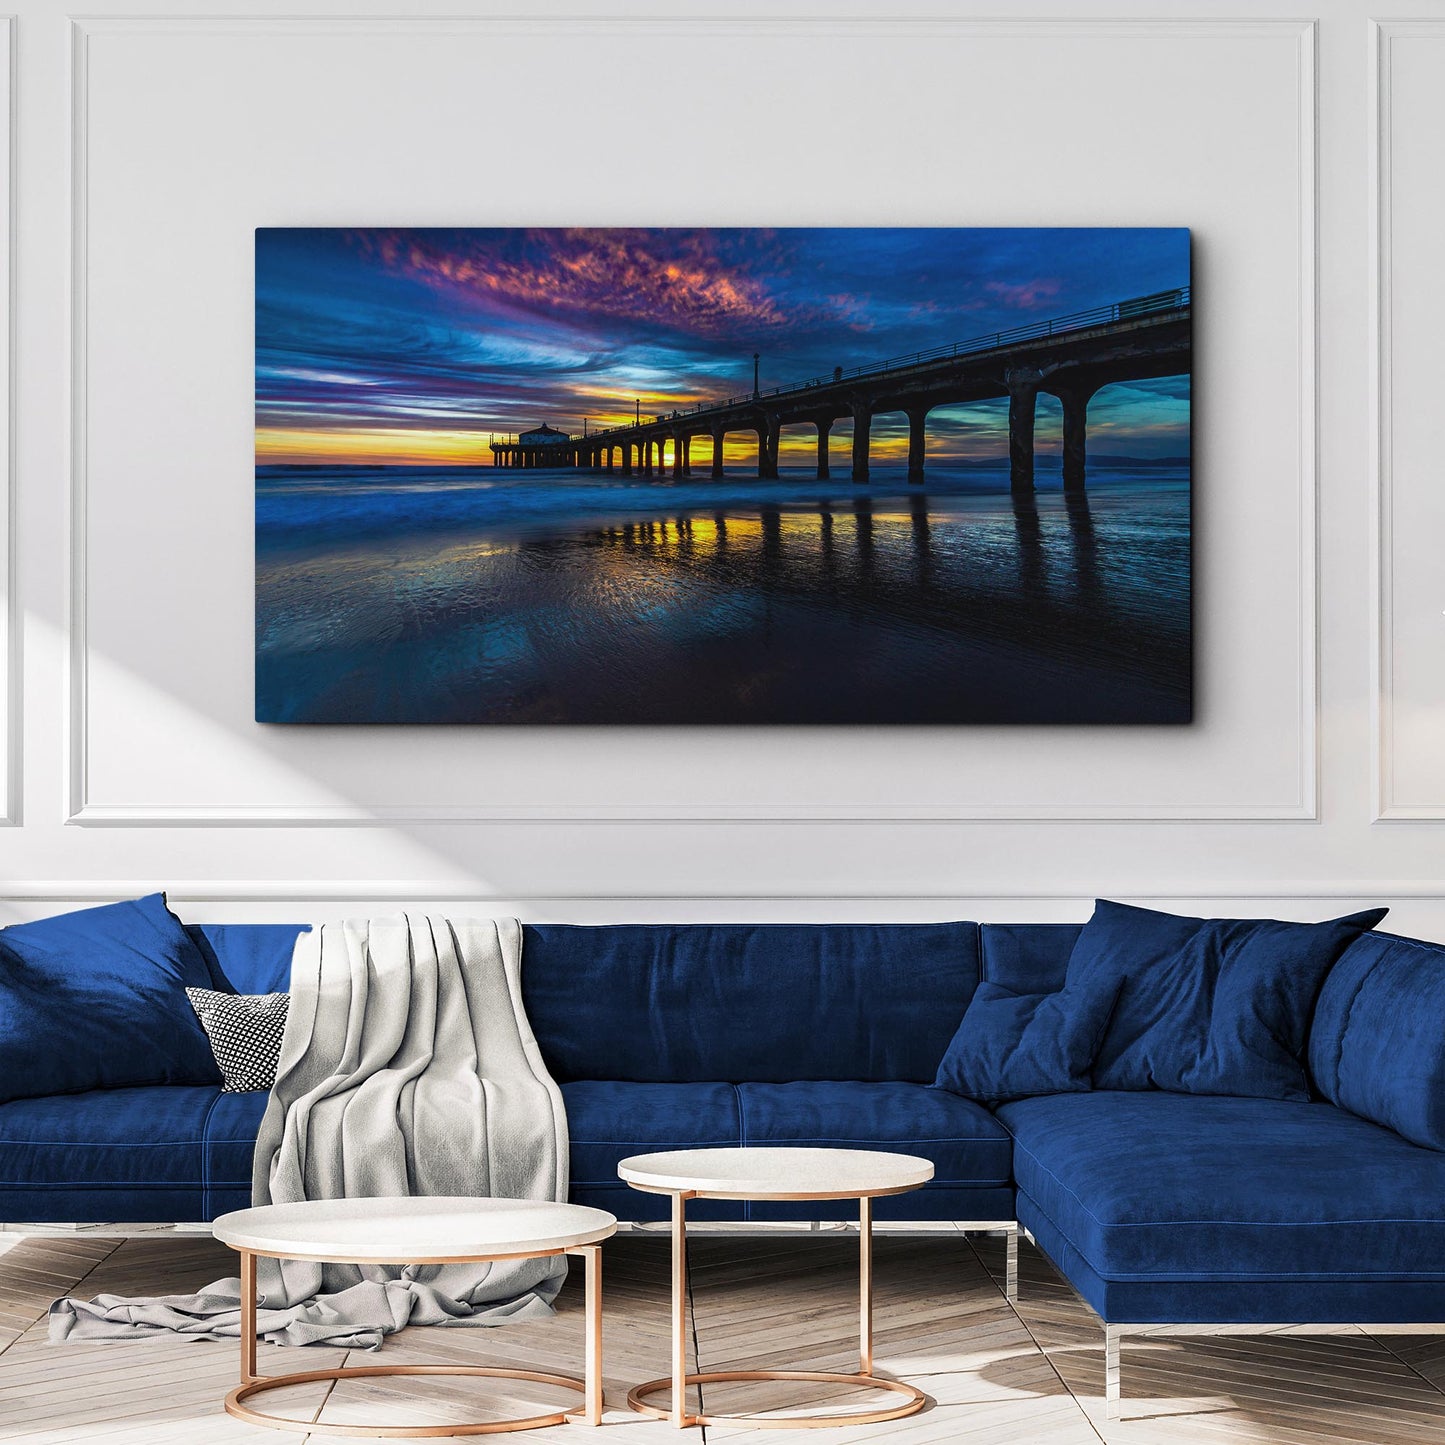 Sunset Beach Pier Canvas Wall Art Style 2 - Image by Tailored Canvases